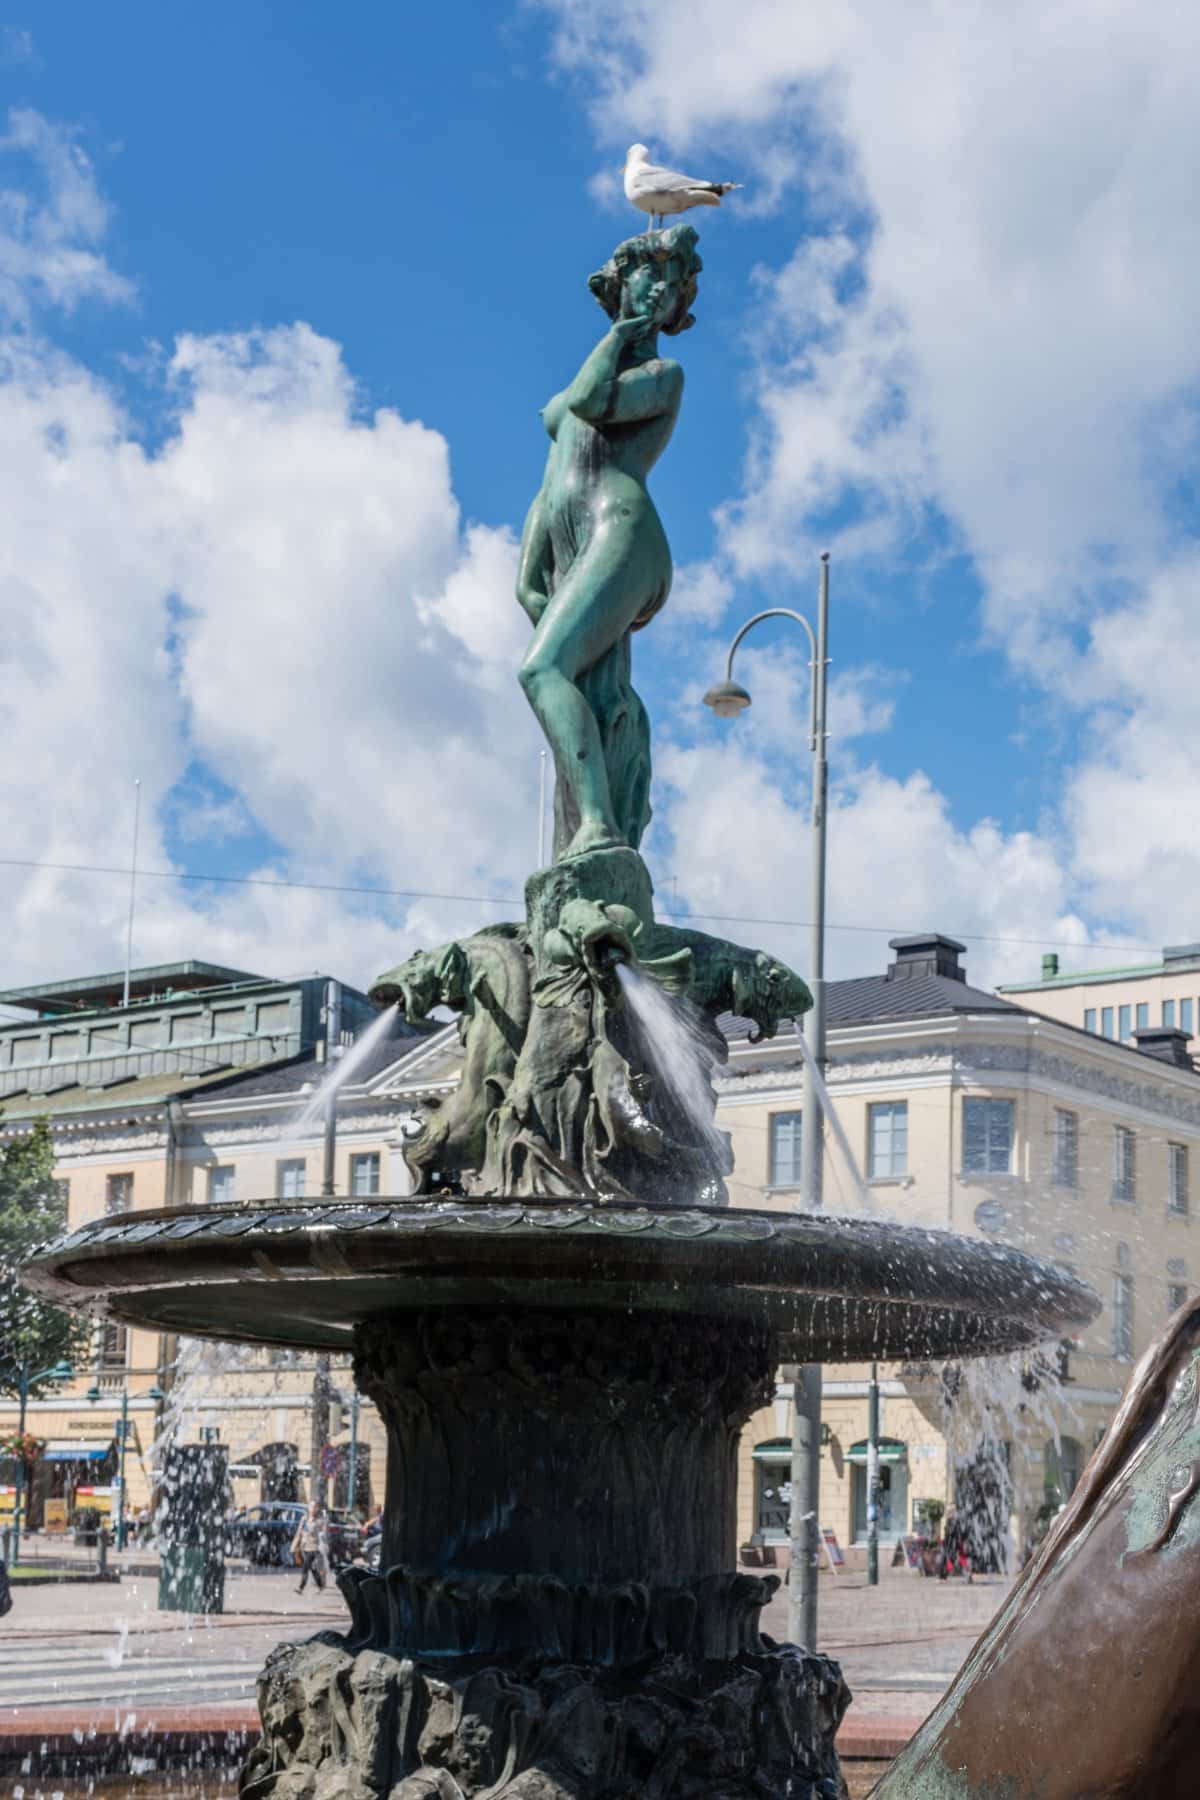 A statue of naked girl with water spitting dragons. 